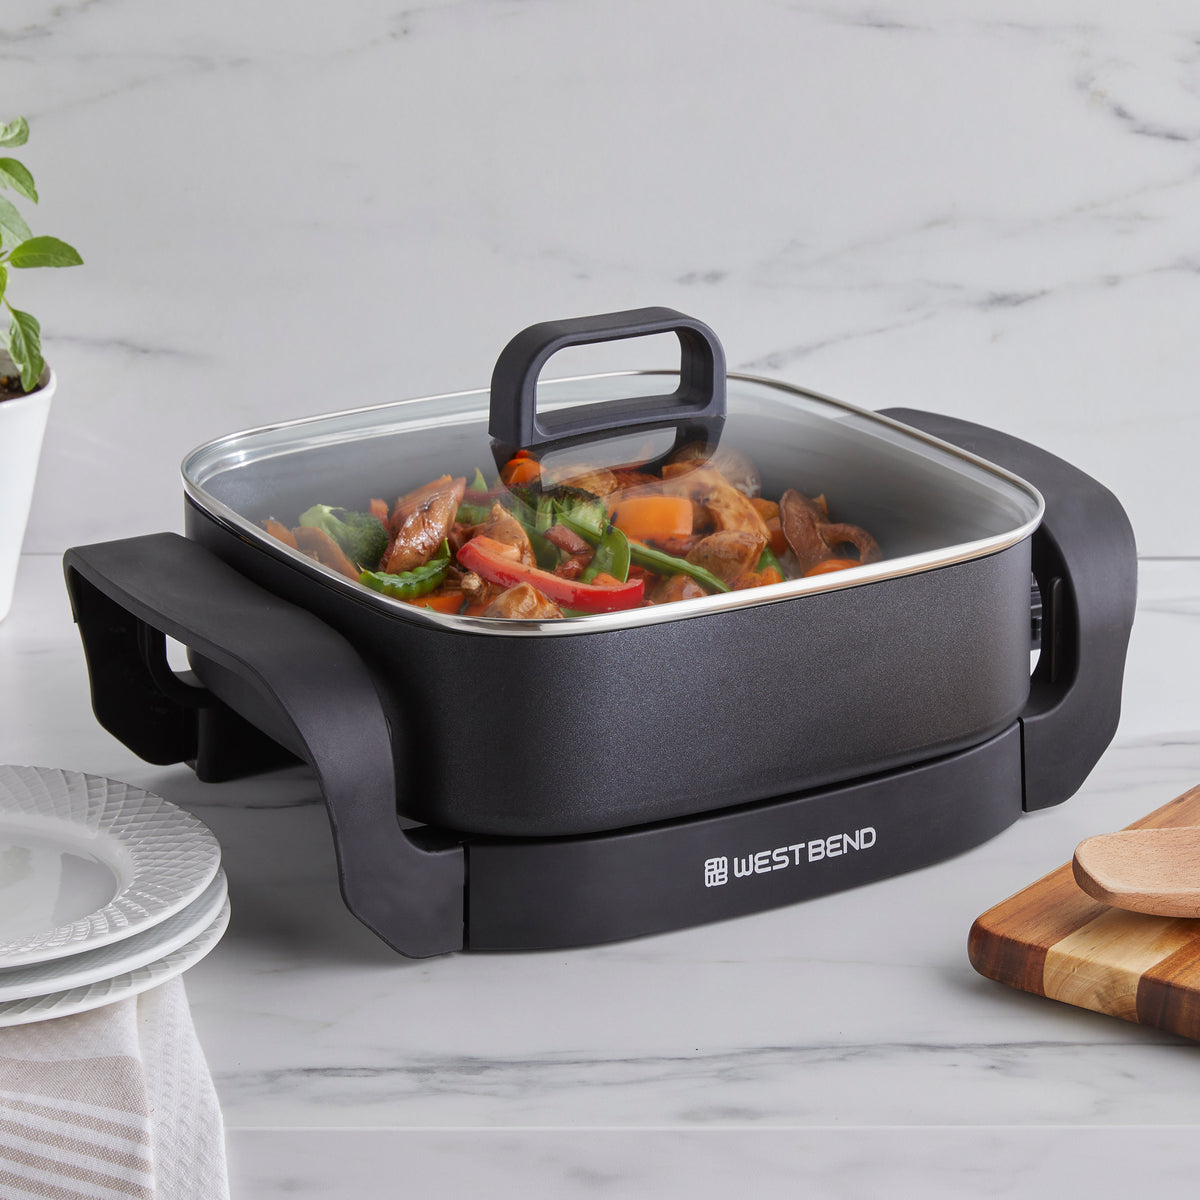 West Bend Extra Deep 12 Electric Skillet 72212